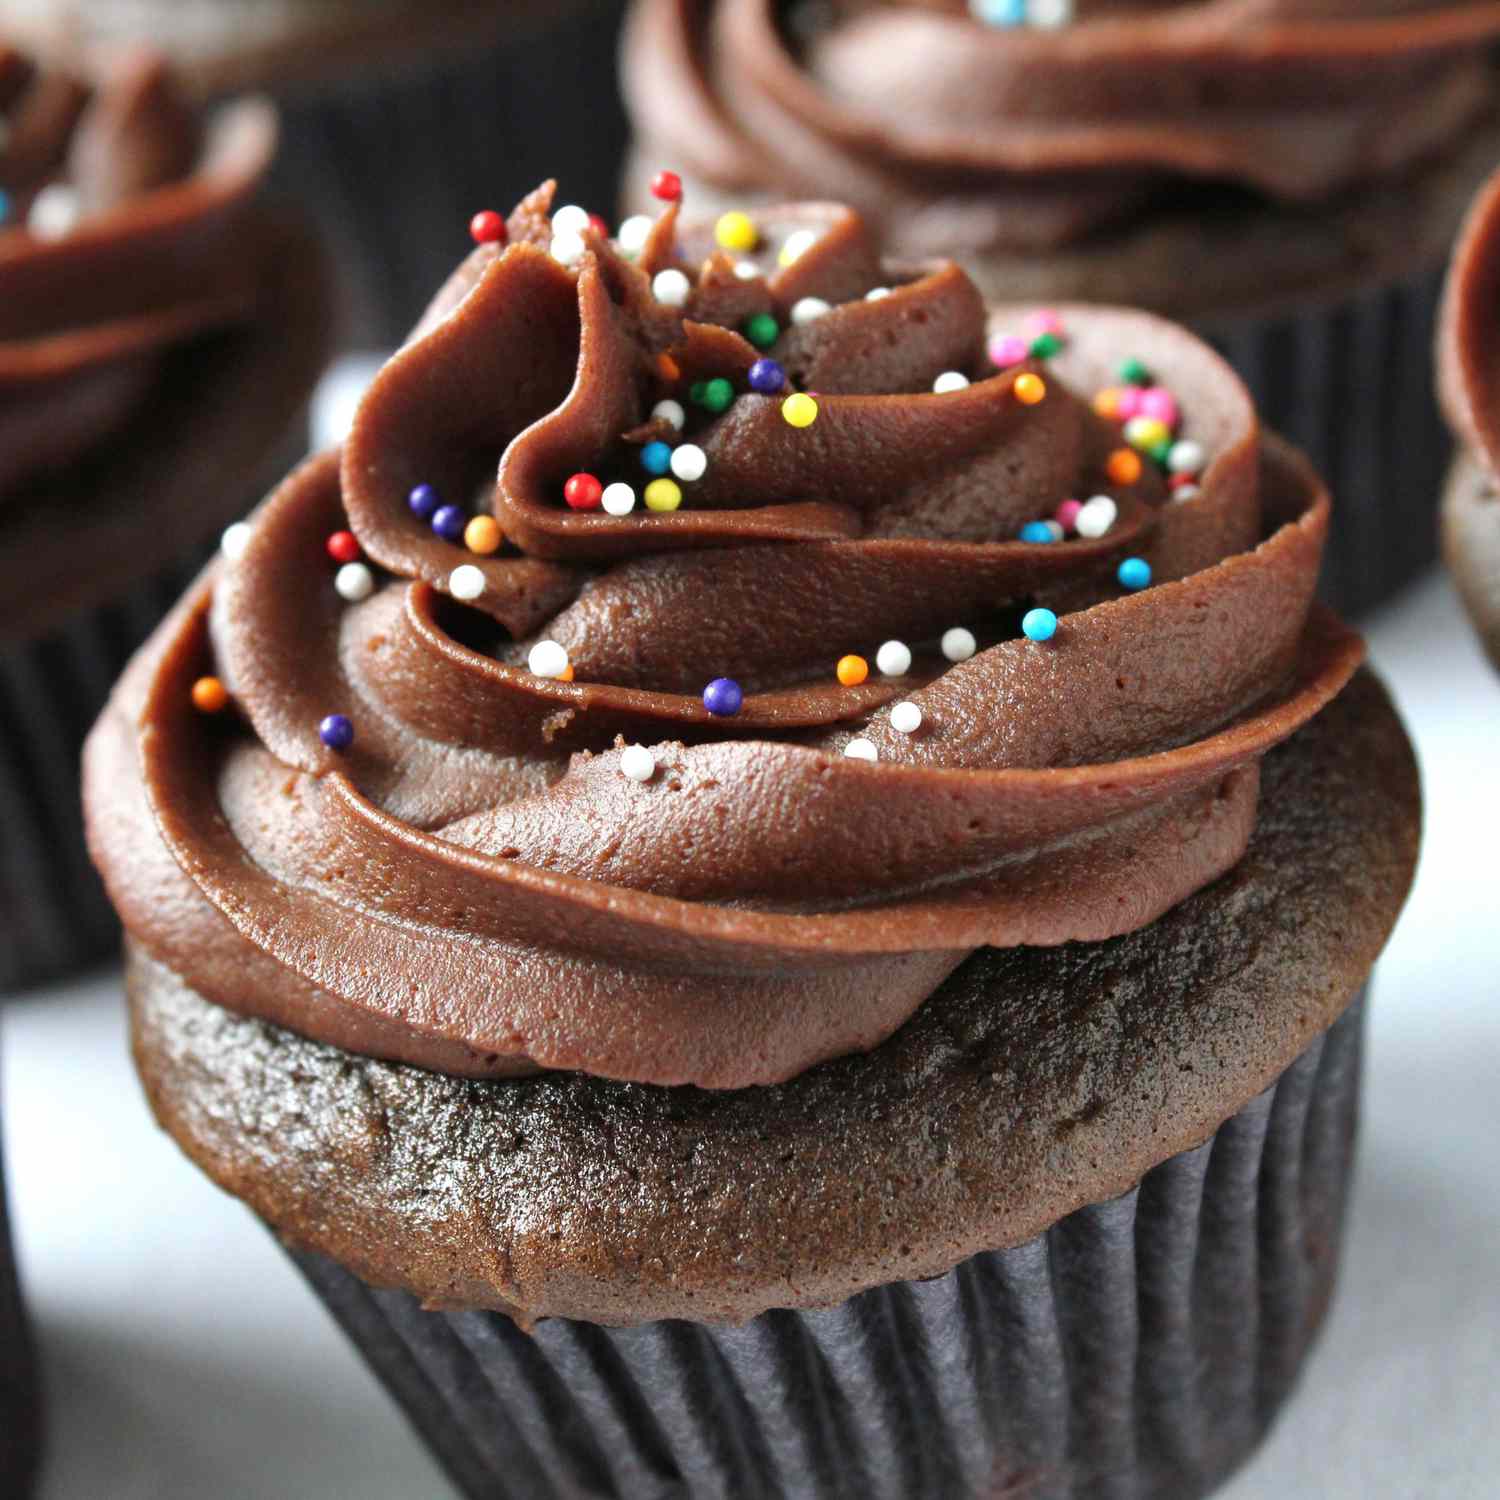 chocolate fudge frosting on a chocolate cupcake, with multi-colored sprinkles